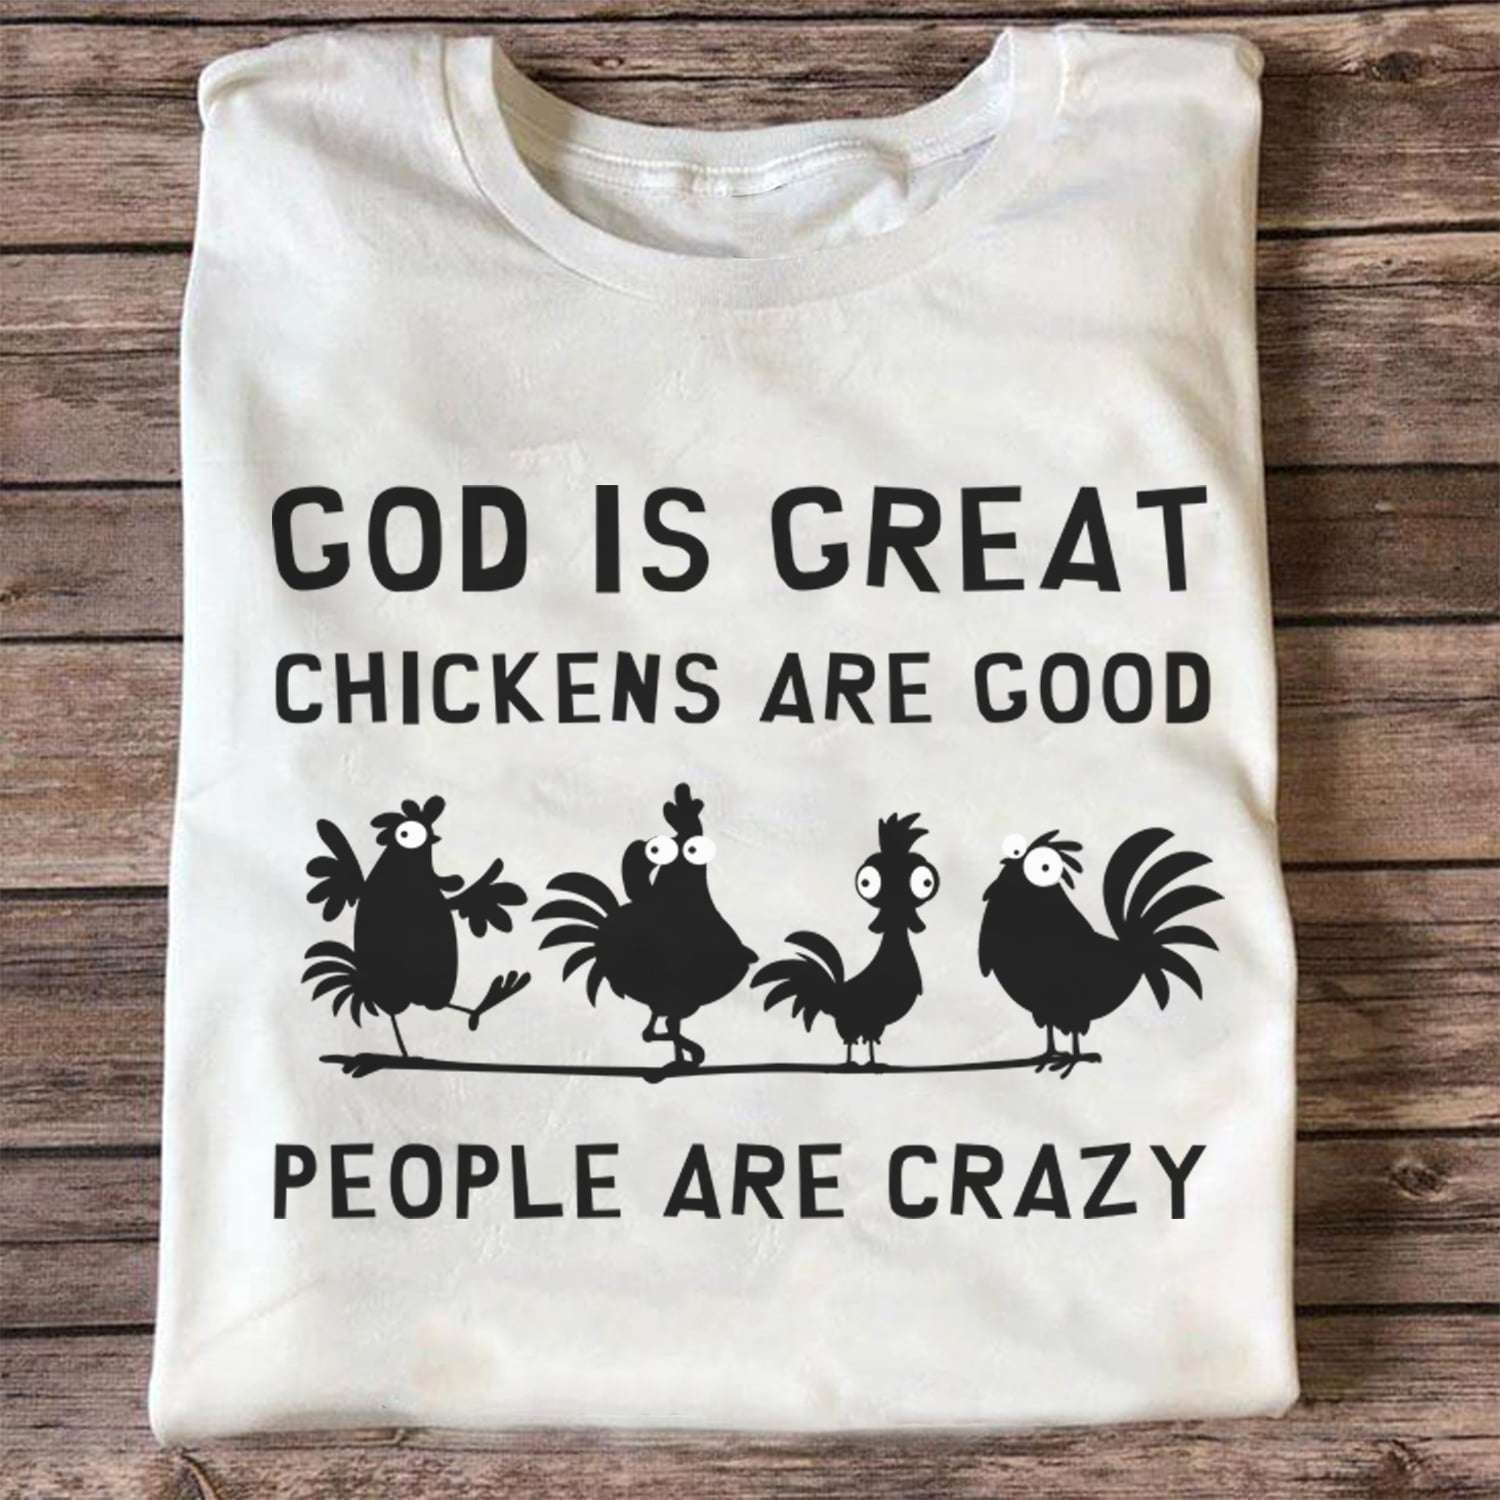 God is good, chickens are good, people are crazy - Jesus and chicken lover